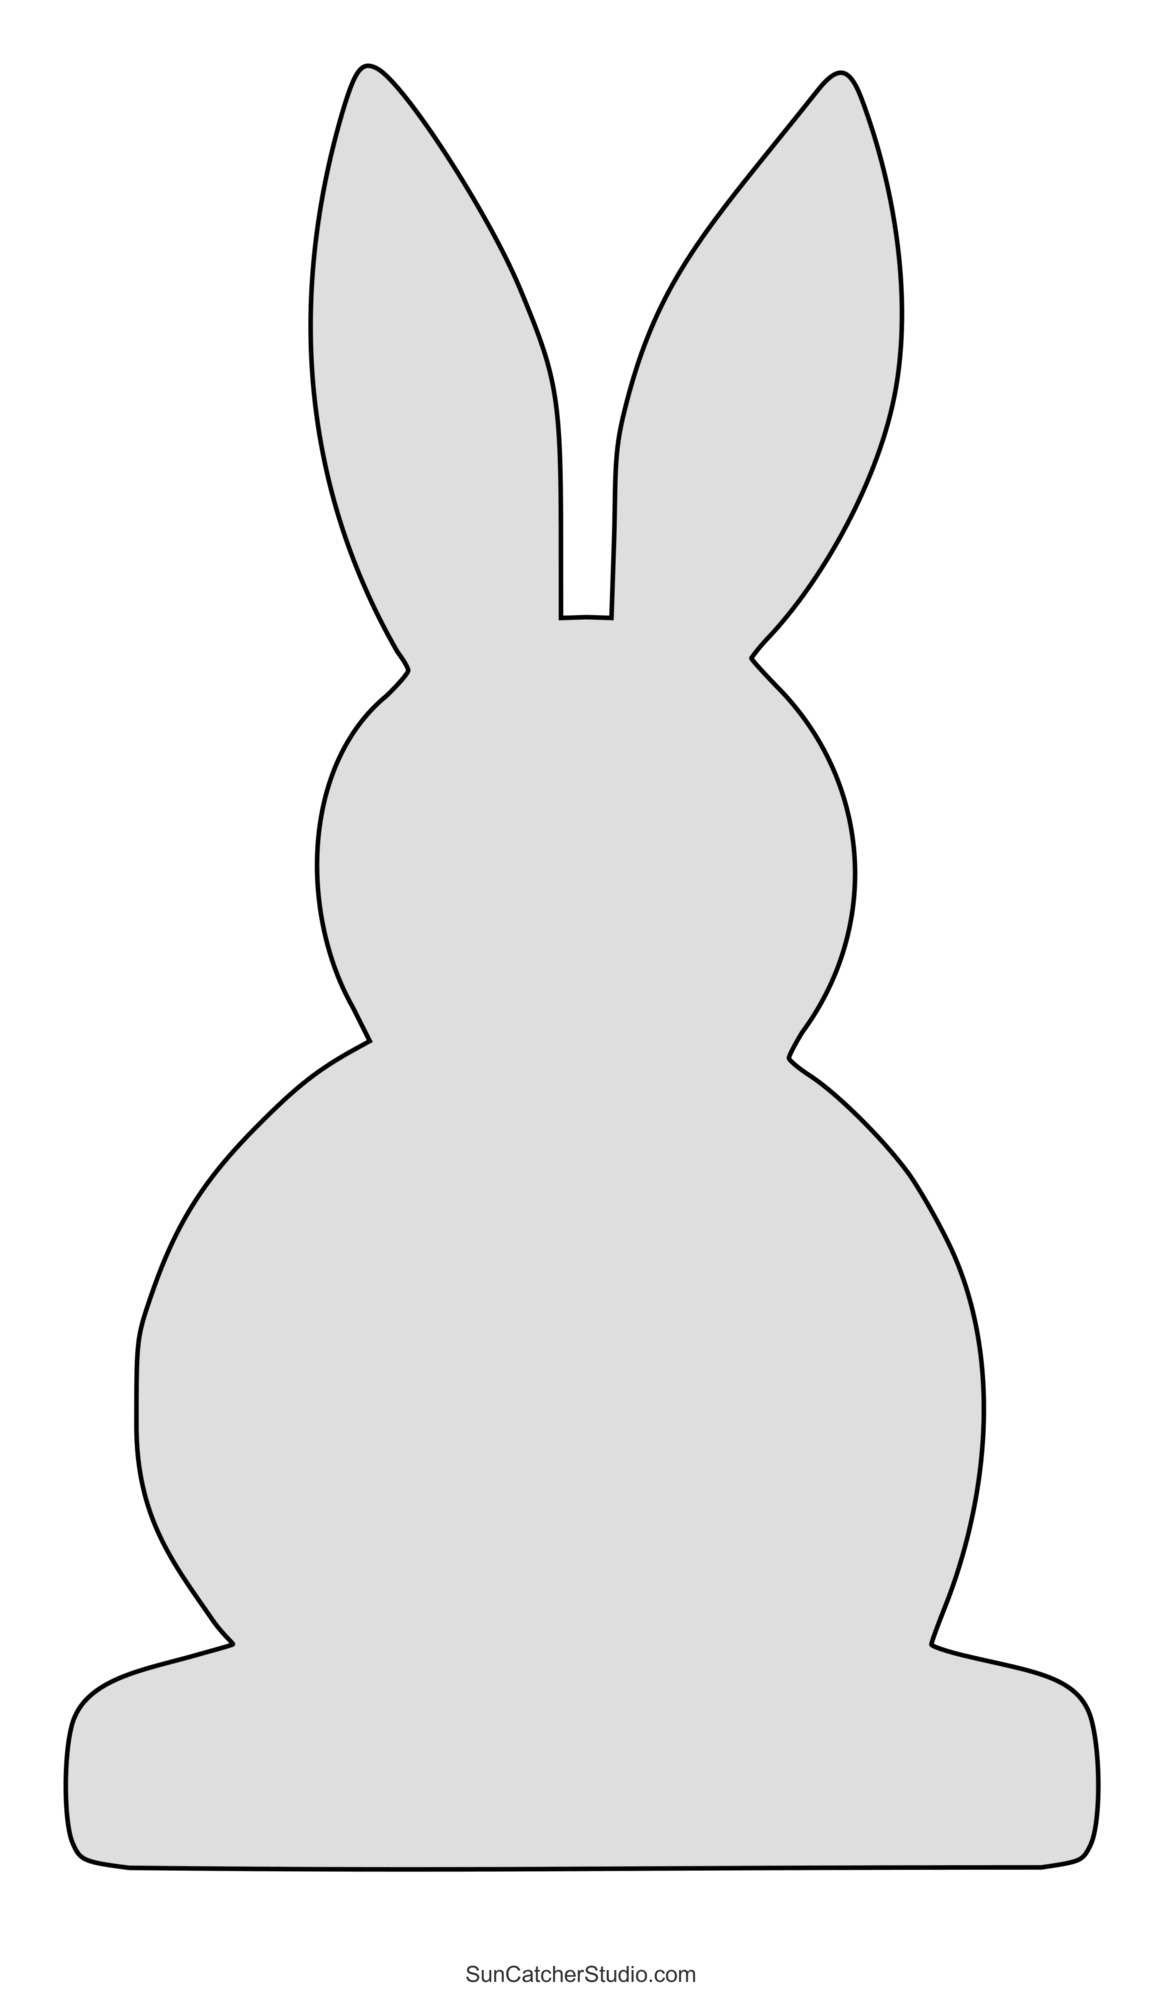  16 Pcs Easter Stencils for Painting 5 Inch, Easter Stencils  for Kids, Reusable Bunny Egg Carrot Stencils Templates for Easter  Decoration, Easter Party DIY Crafts Scrapbook Making (Easter) : Arts